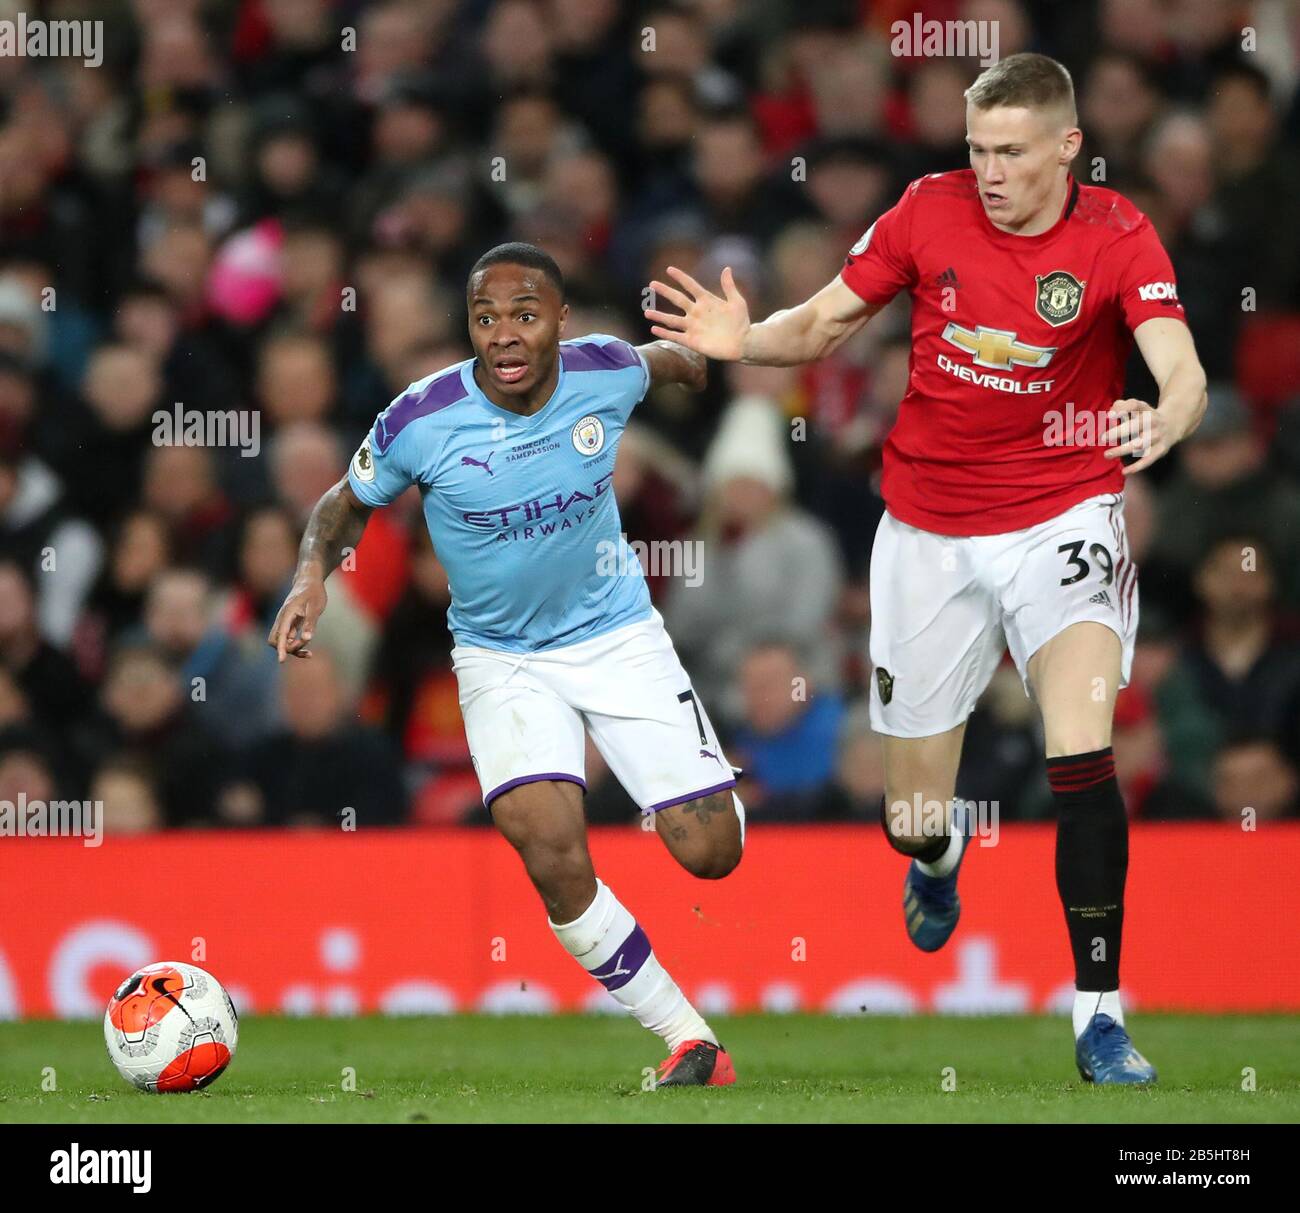 Manchester City S Raheem Sterling Left And Manchester United S Scott Mctominay During The Premier League Match At Old Trafford Manchester Stock Photo Alamy